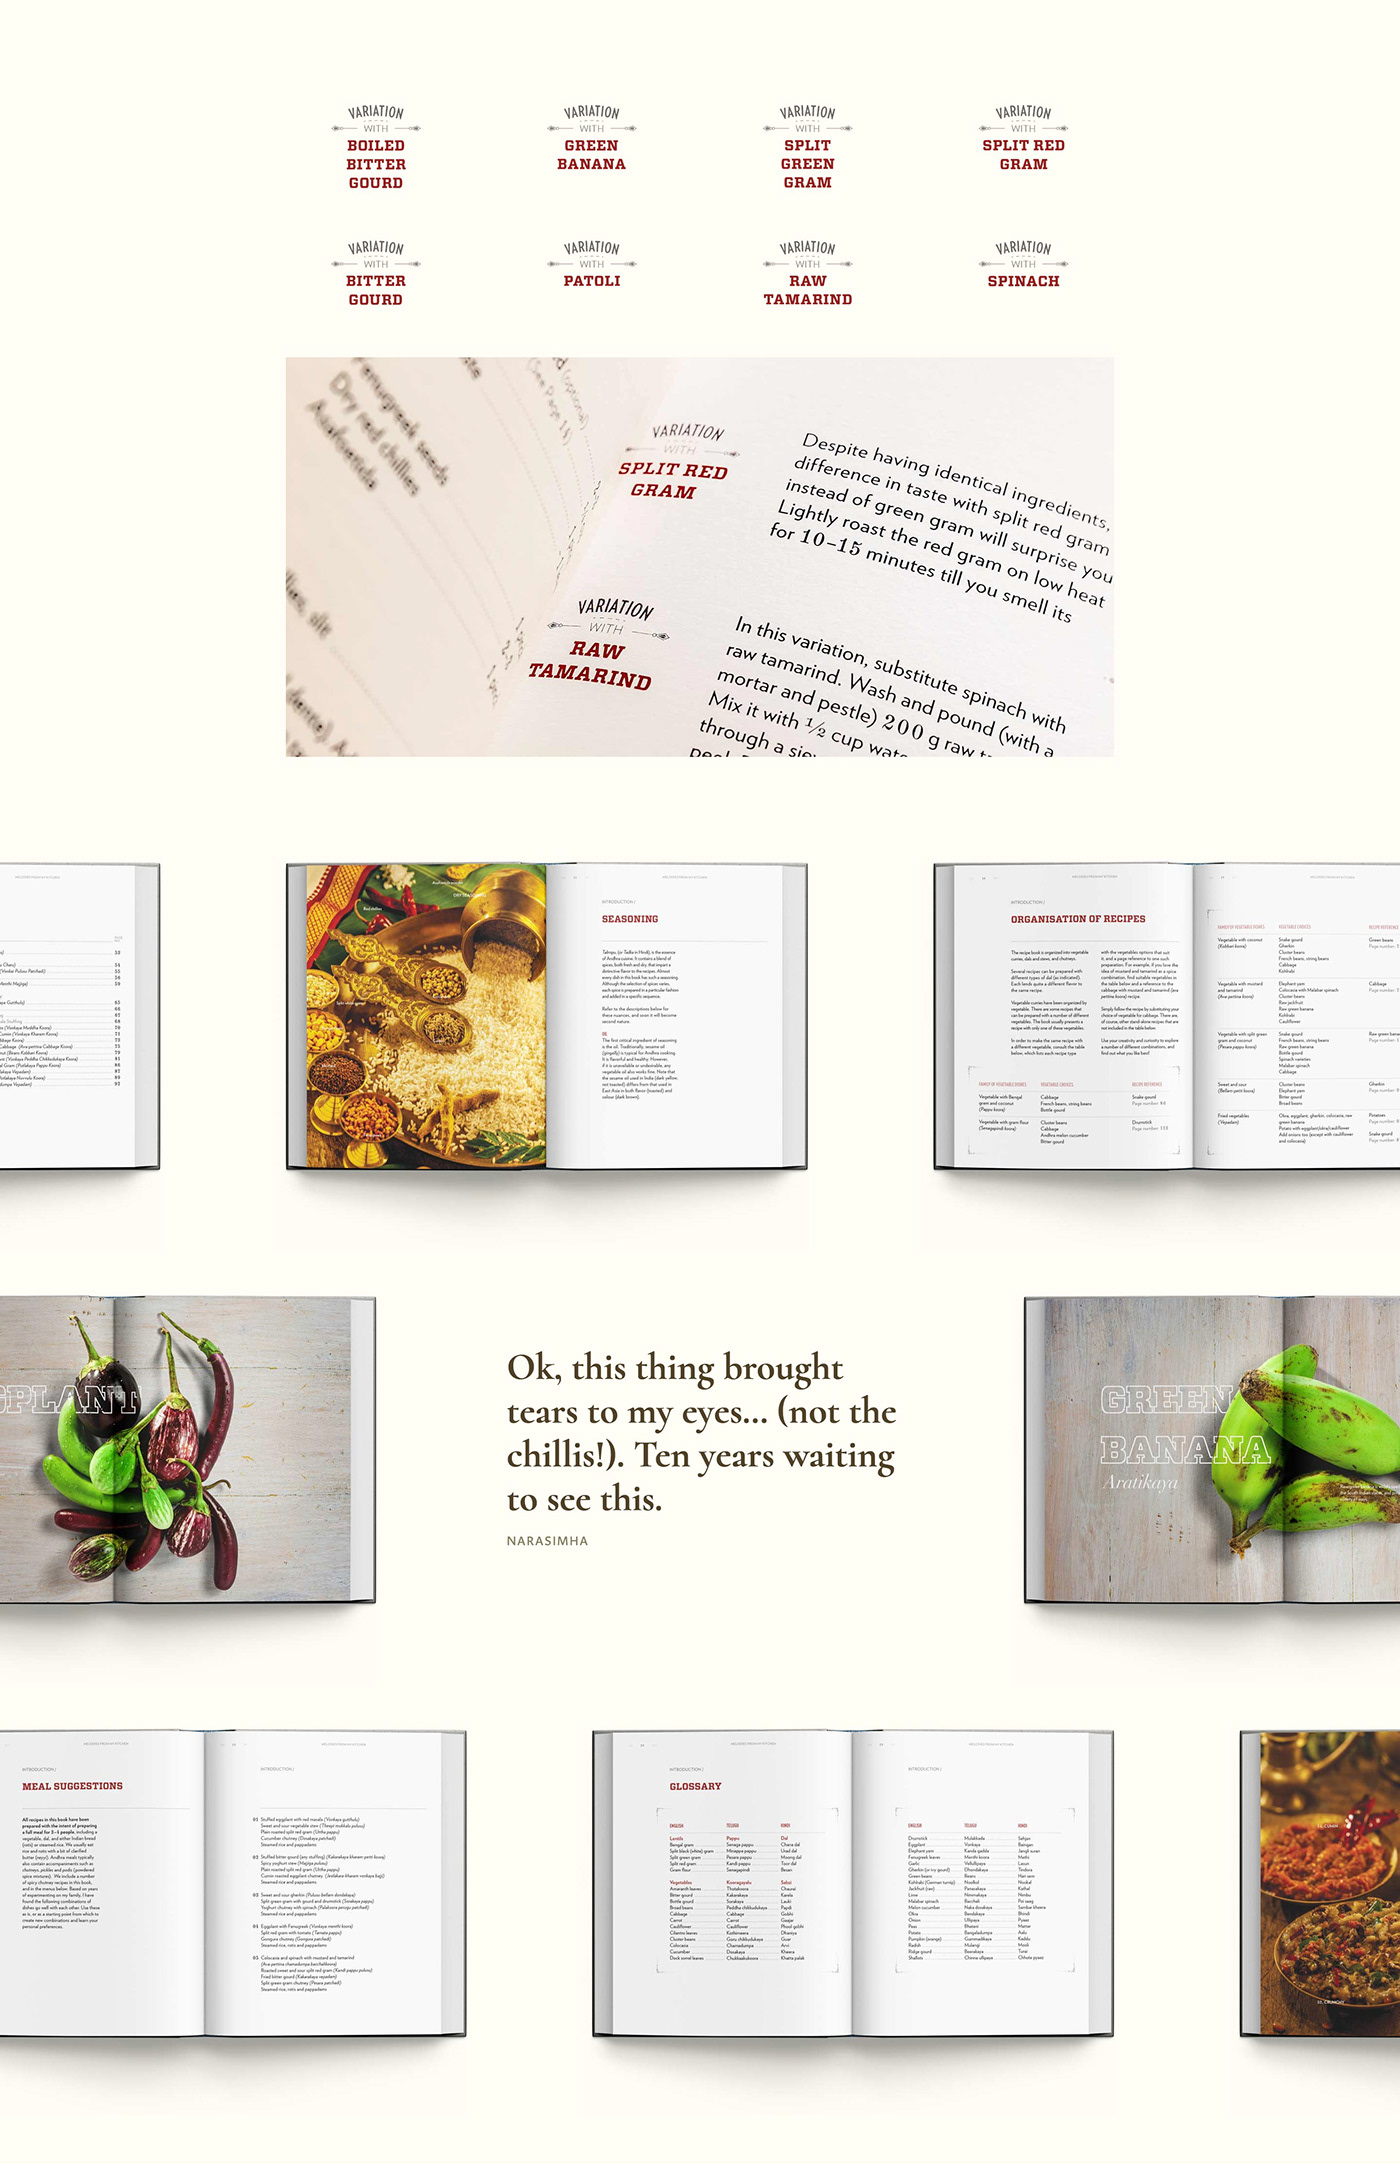 A collection of various text treatment and spreads from the book, along with a client testimonial.